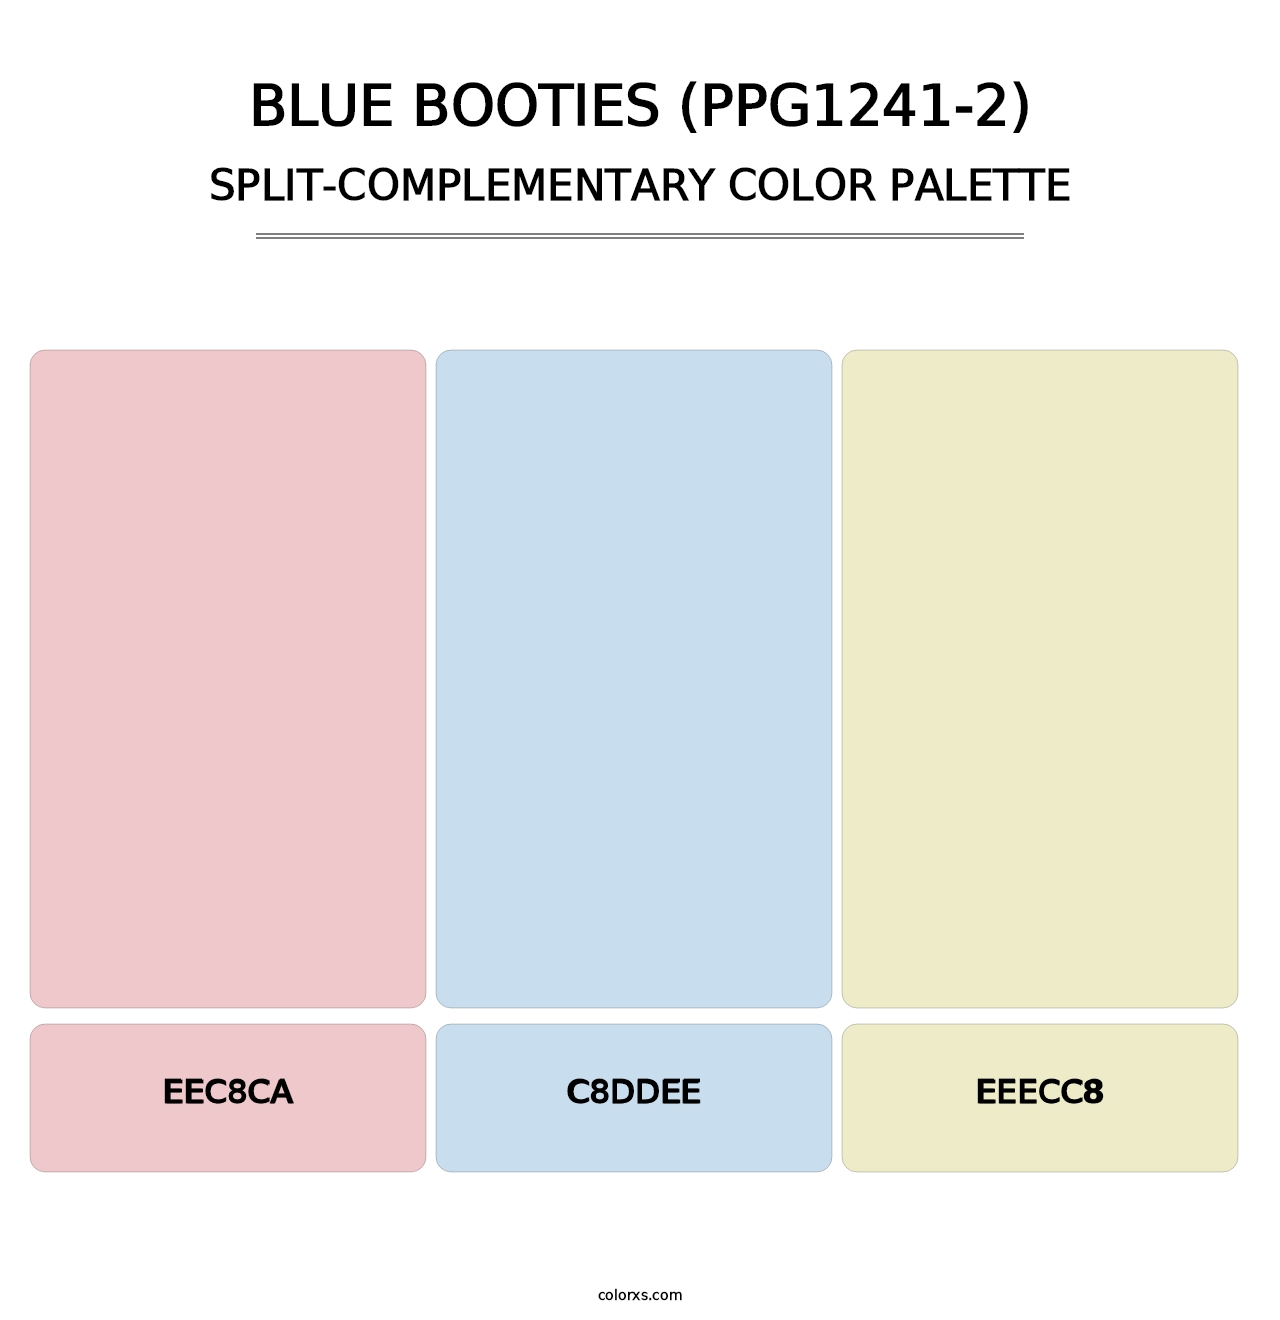 Blue Booties (PPG1241-2) - Split-Complementary Color Palette